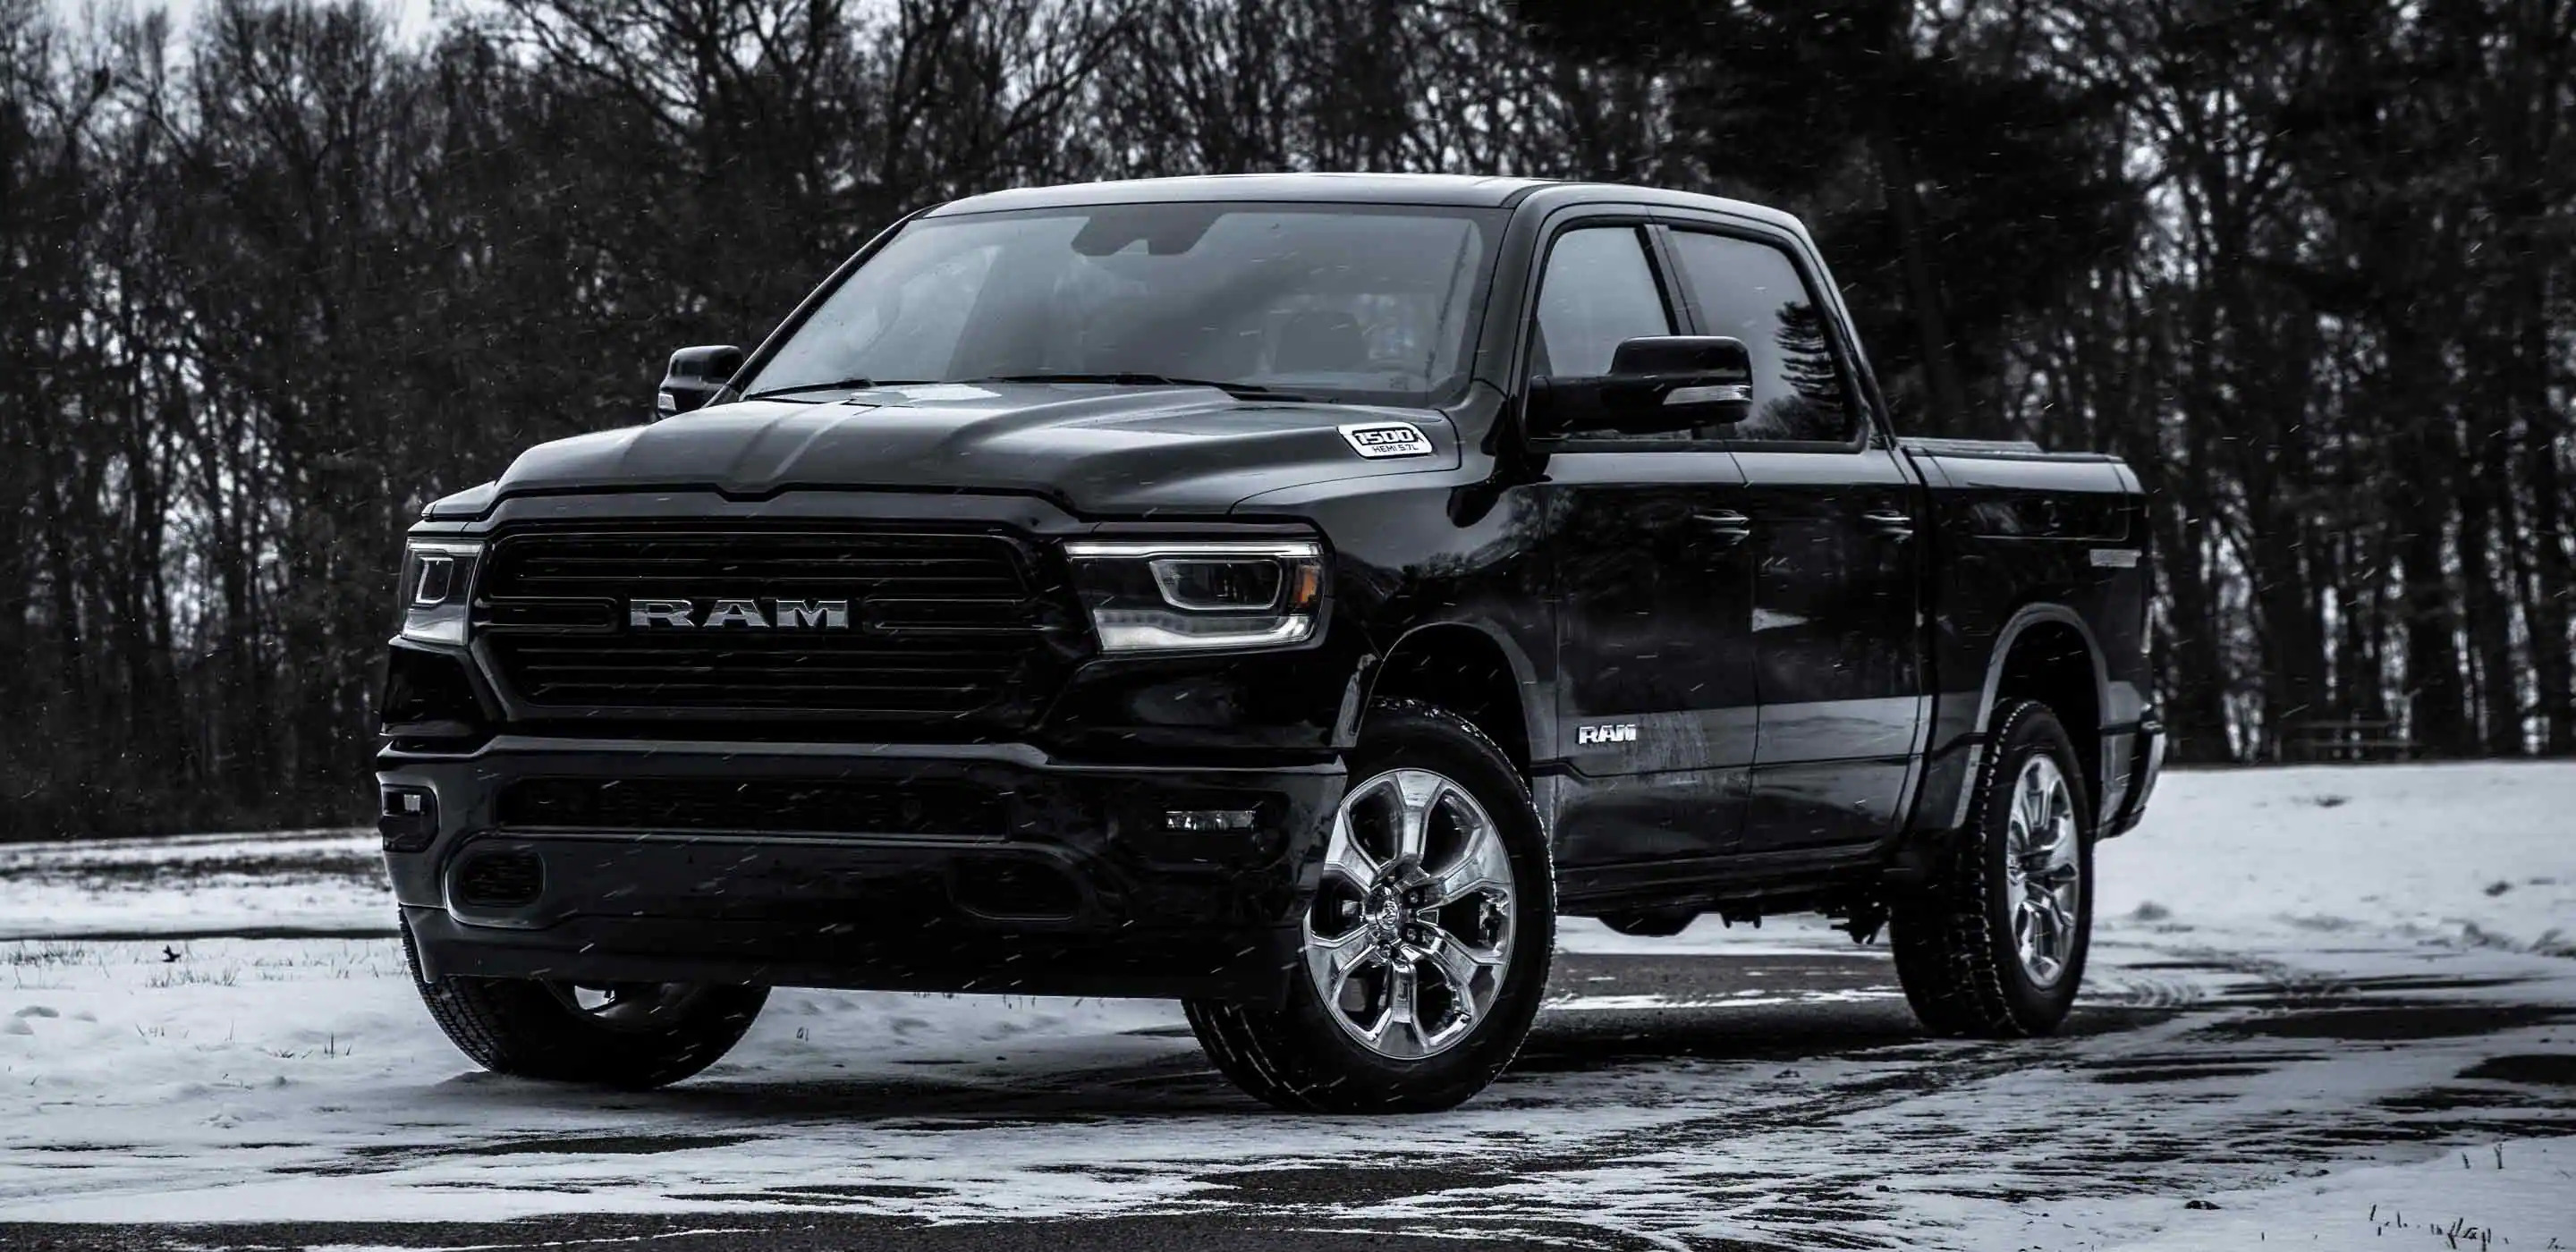 Used Ram 1500 Buying Guide